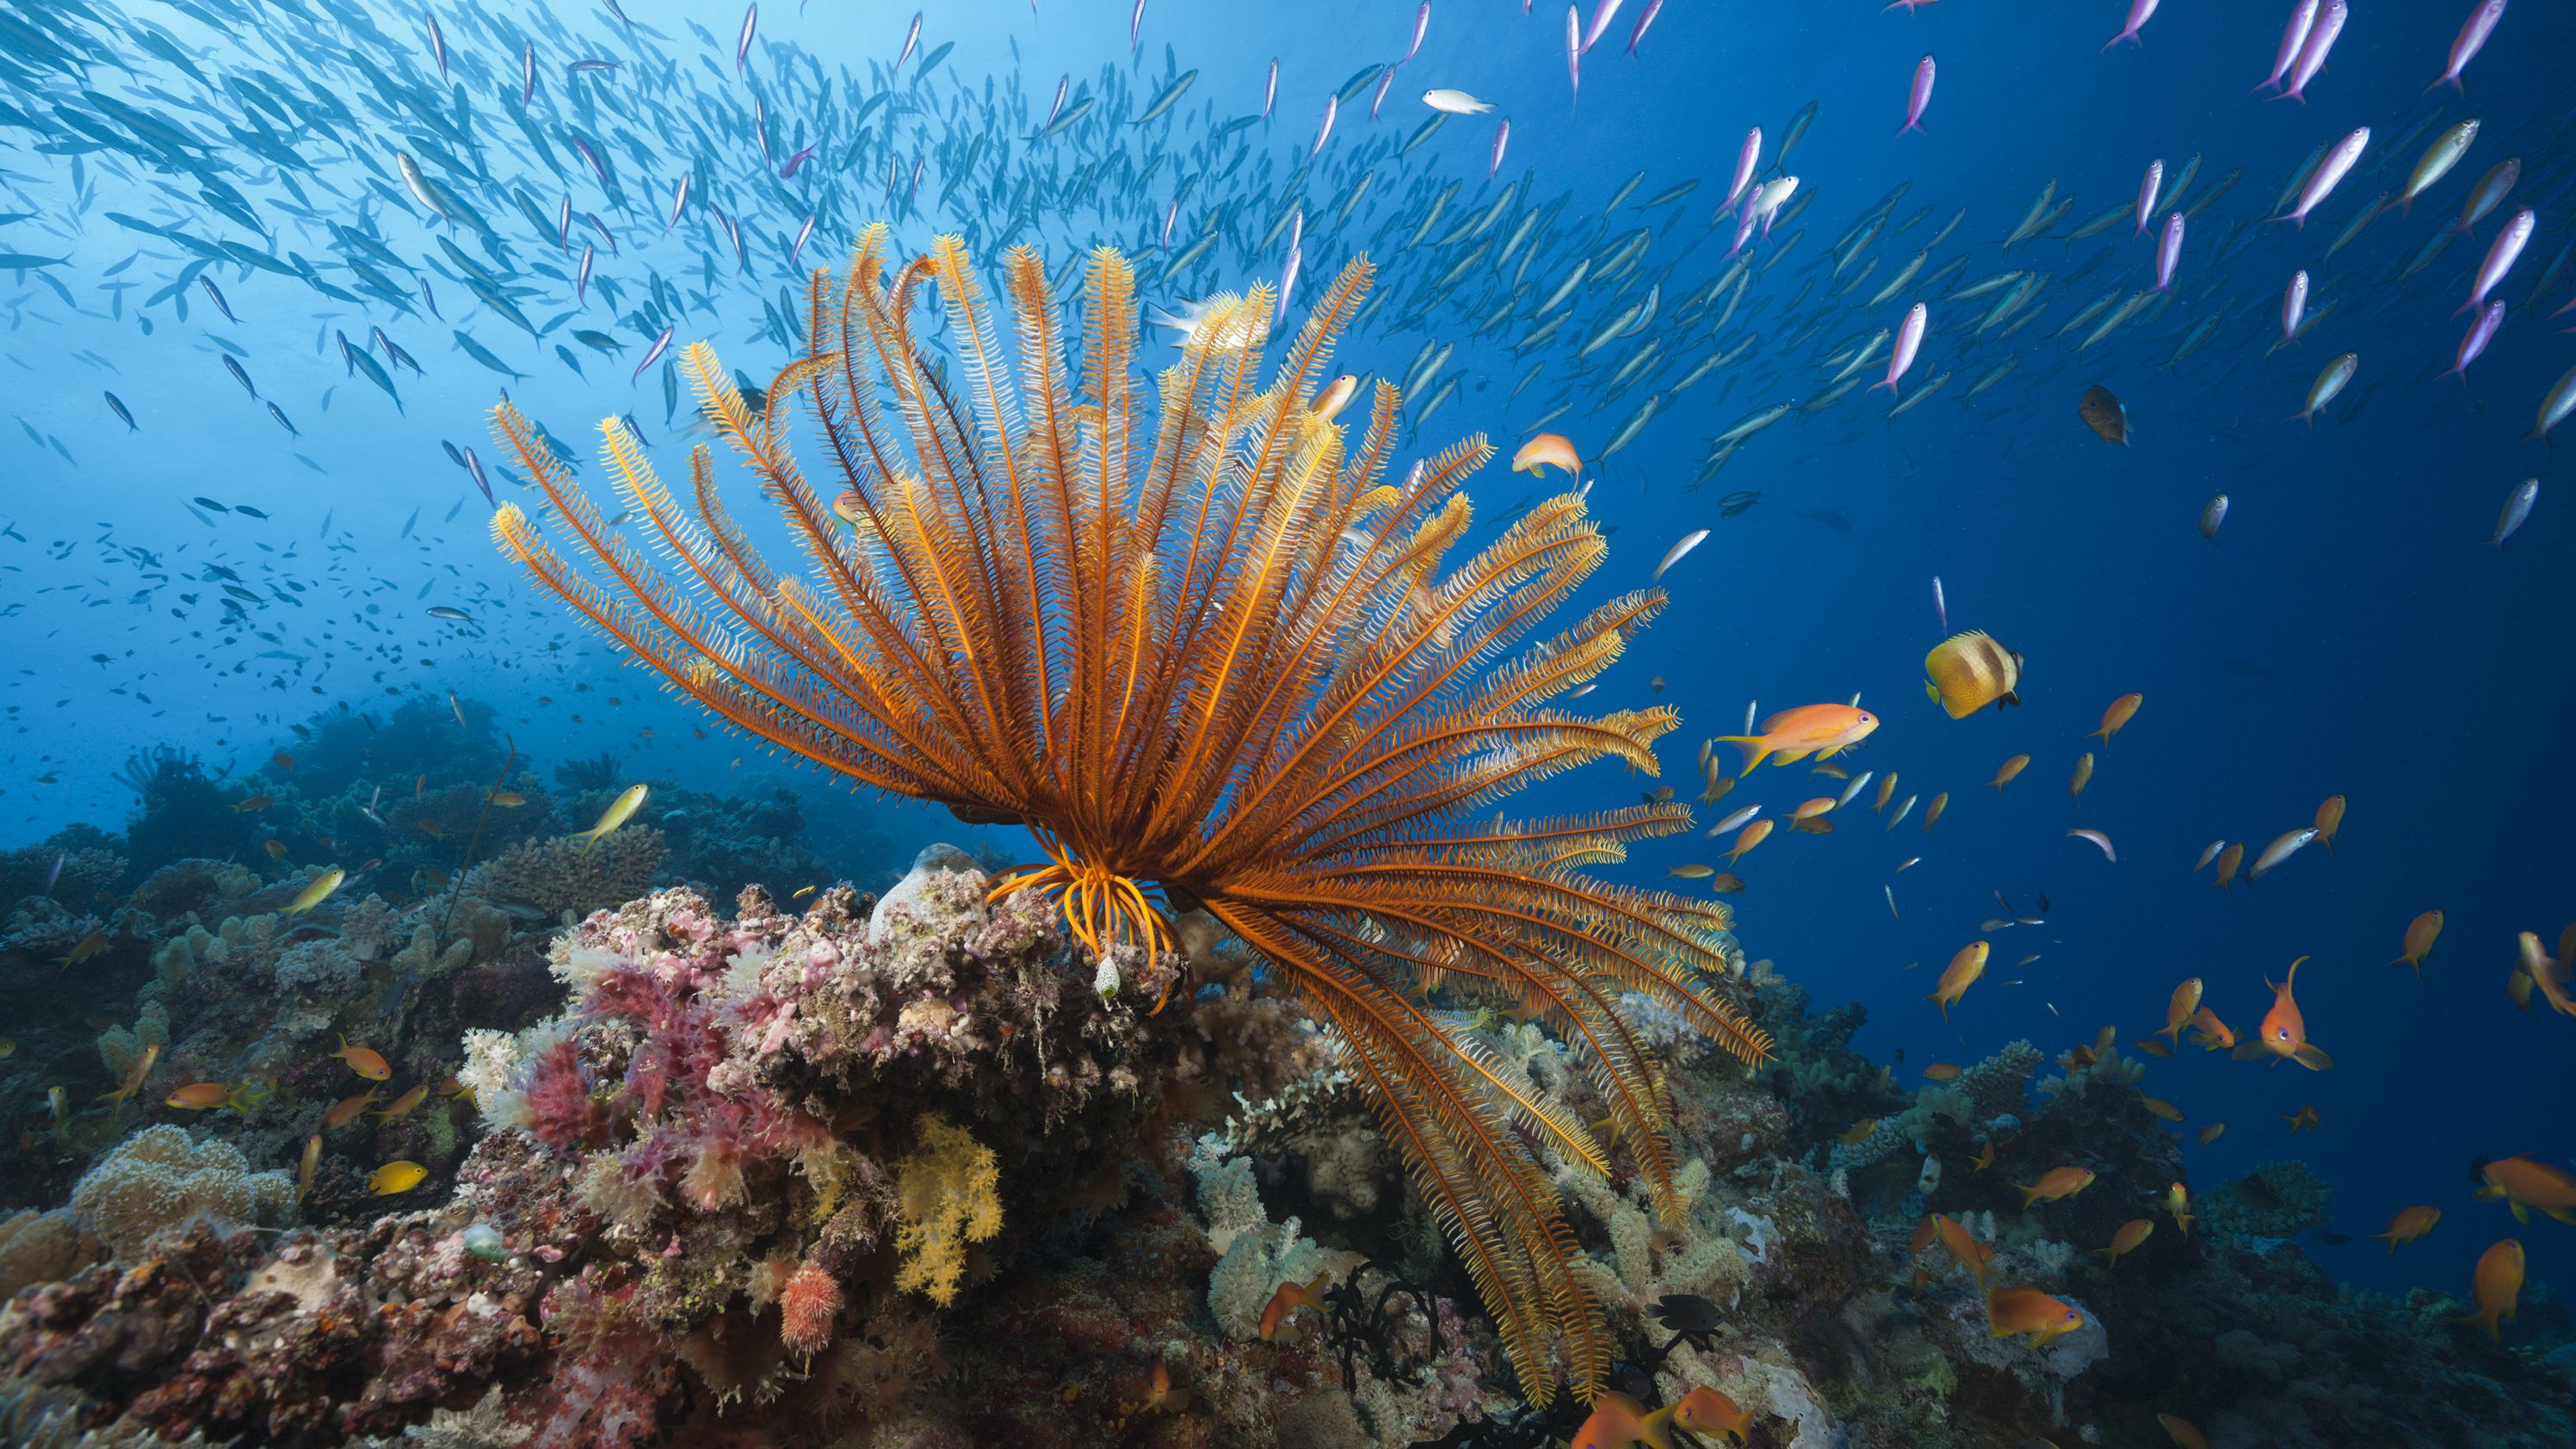 The Great Barrier Reef is home to more than 1,500 types of fish, over 400 kinds of hard corals and dozens of other species.